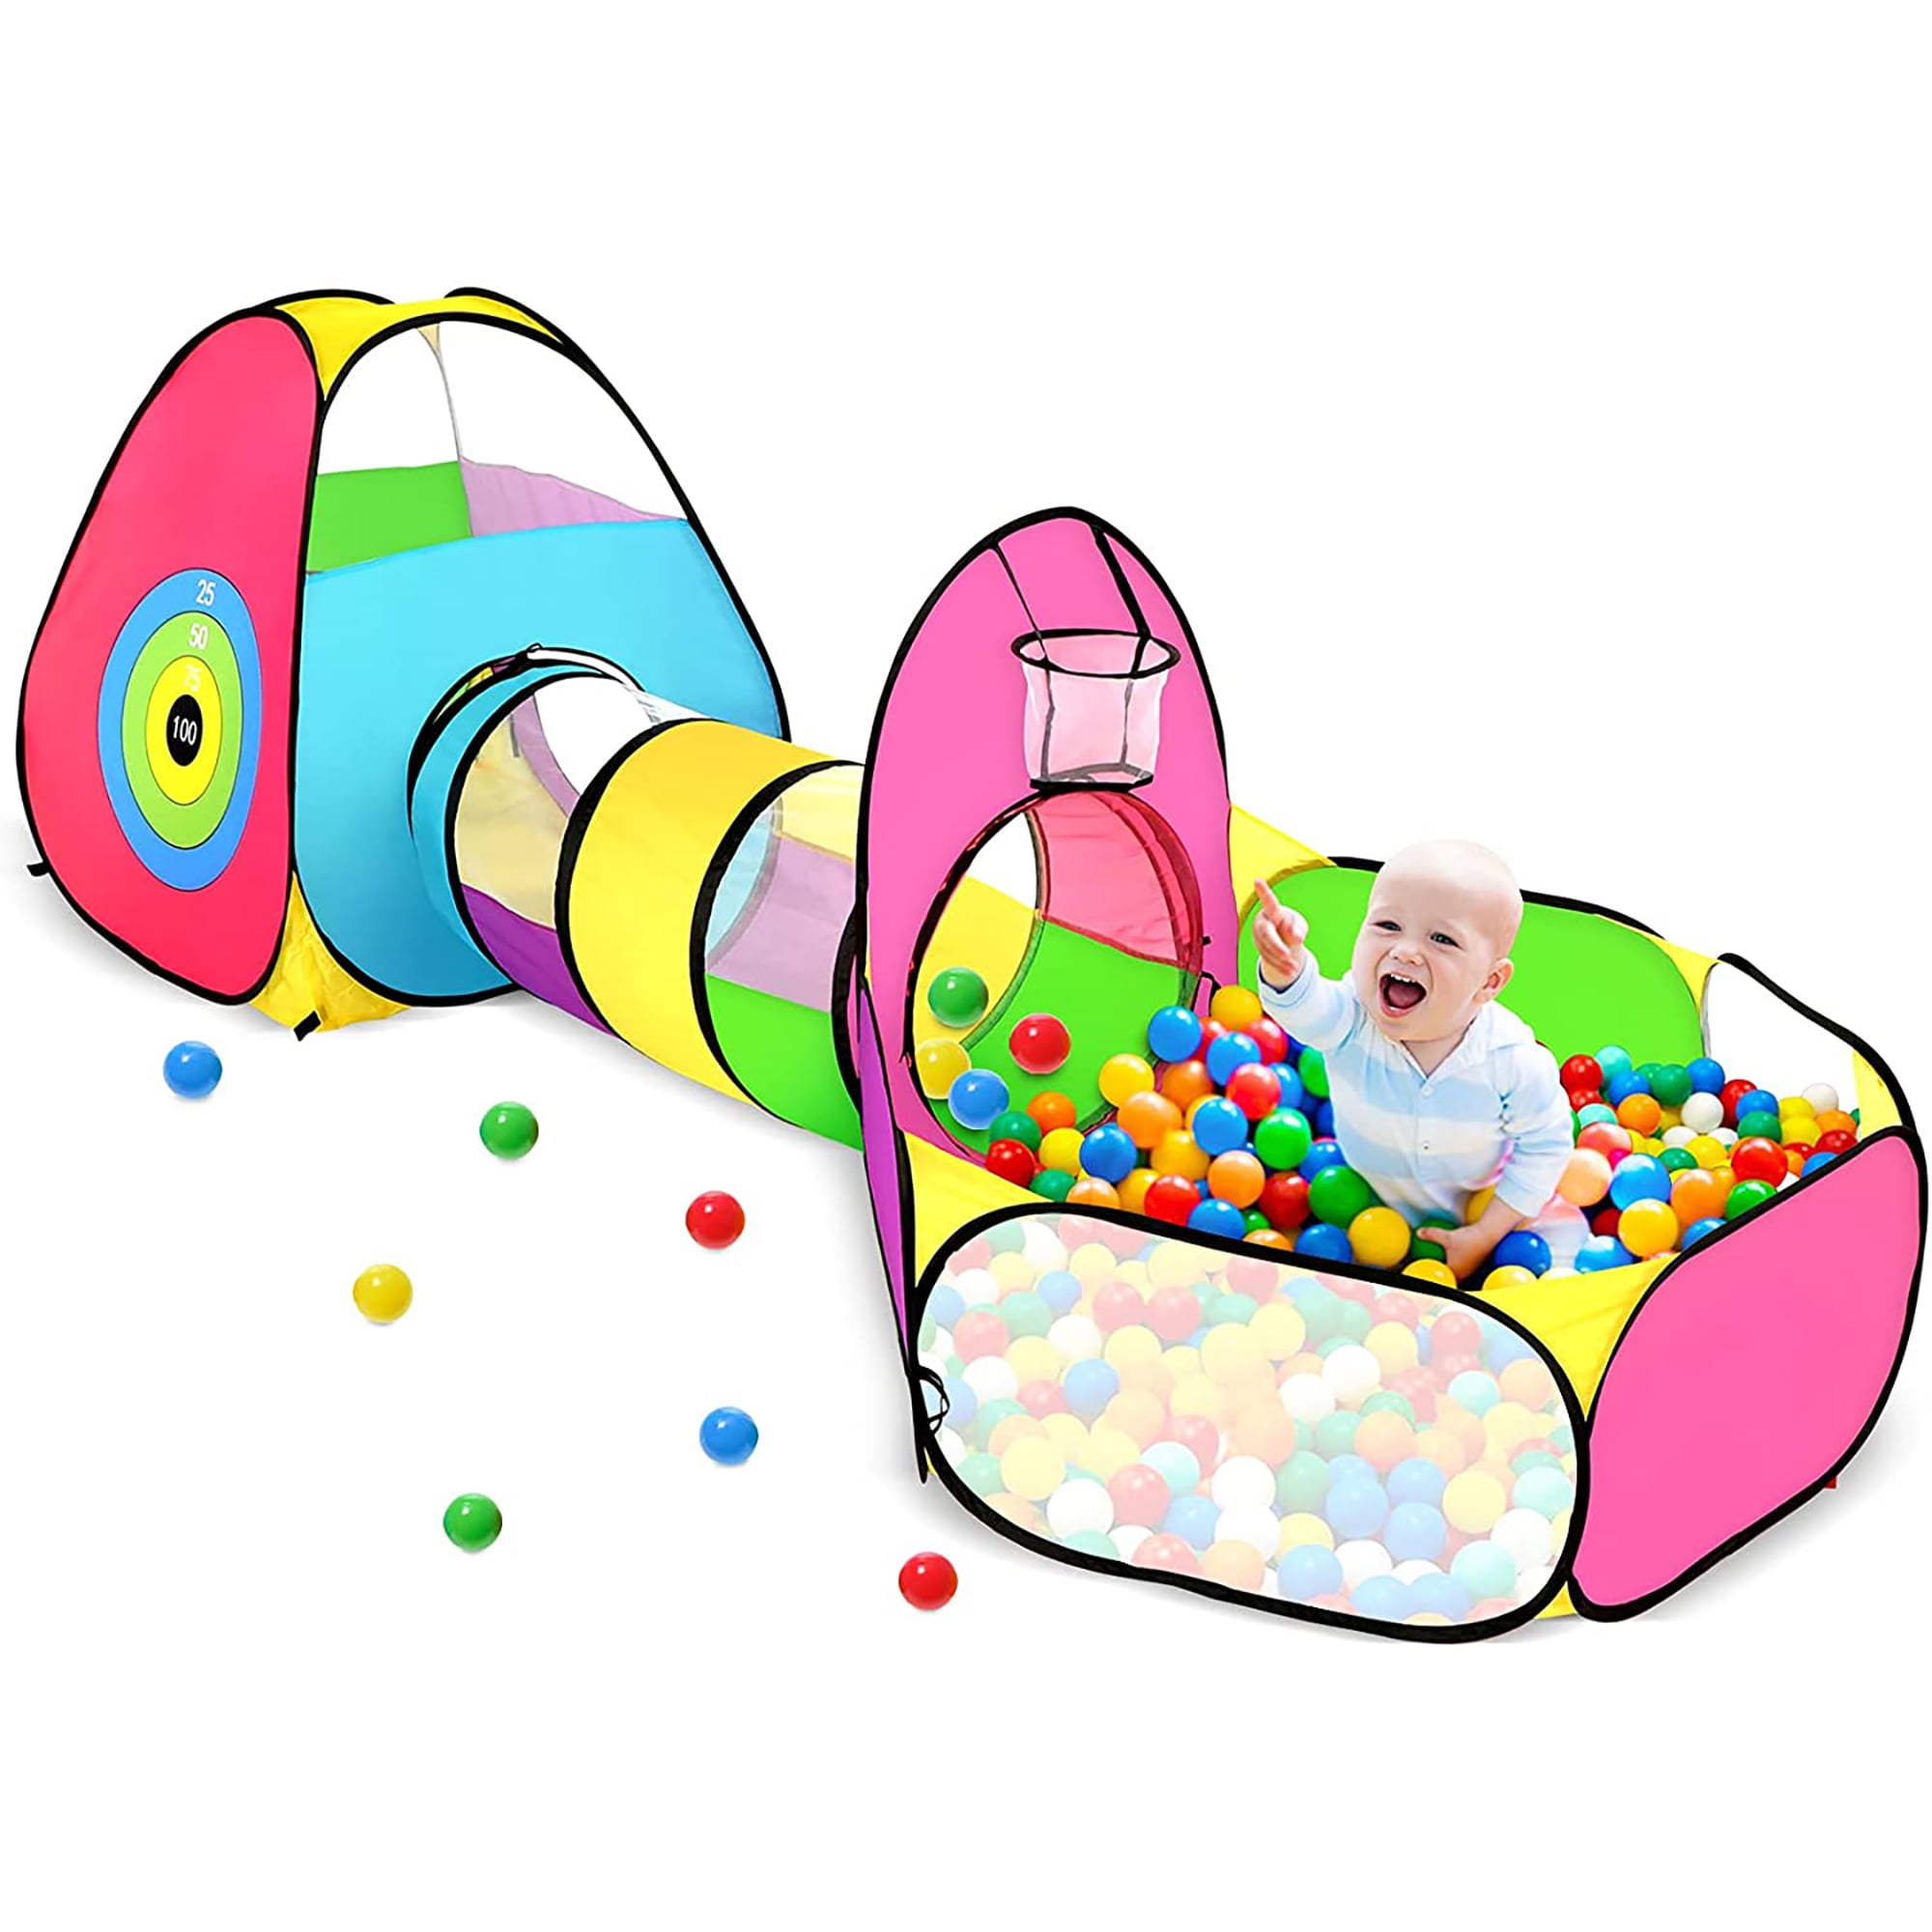 5 in 1 Kids Ball Pit Play Tent Crawl Tunnel Kids Indoor Outdoor Pop Up Playhouse